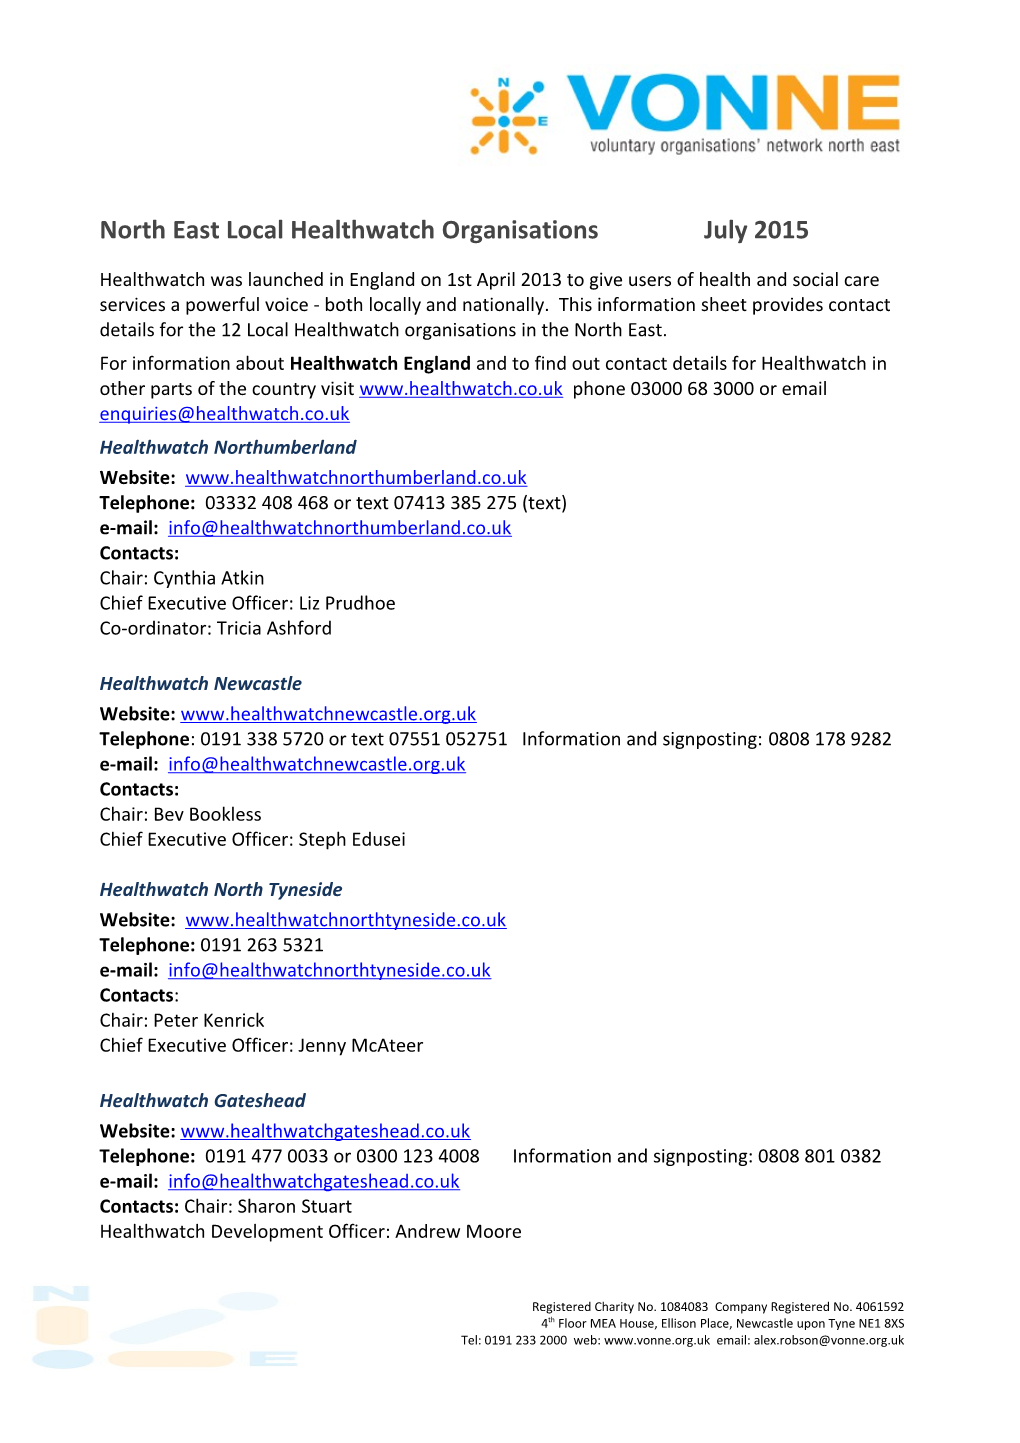 North East Local Healthwatch Organisations July 2015